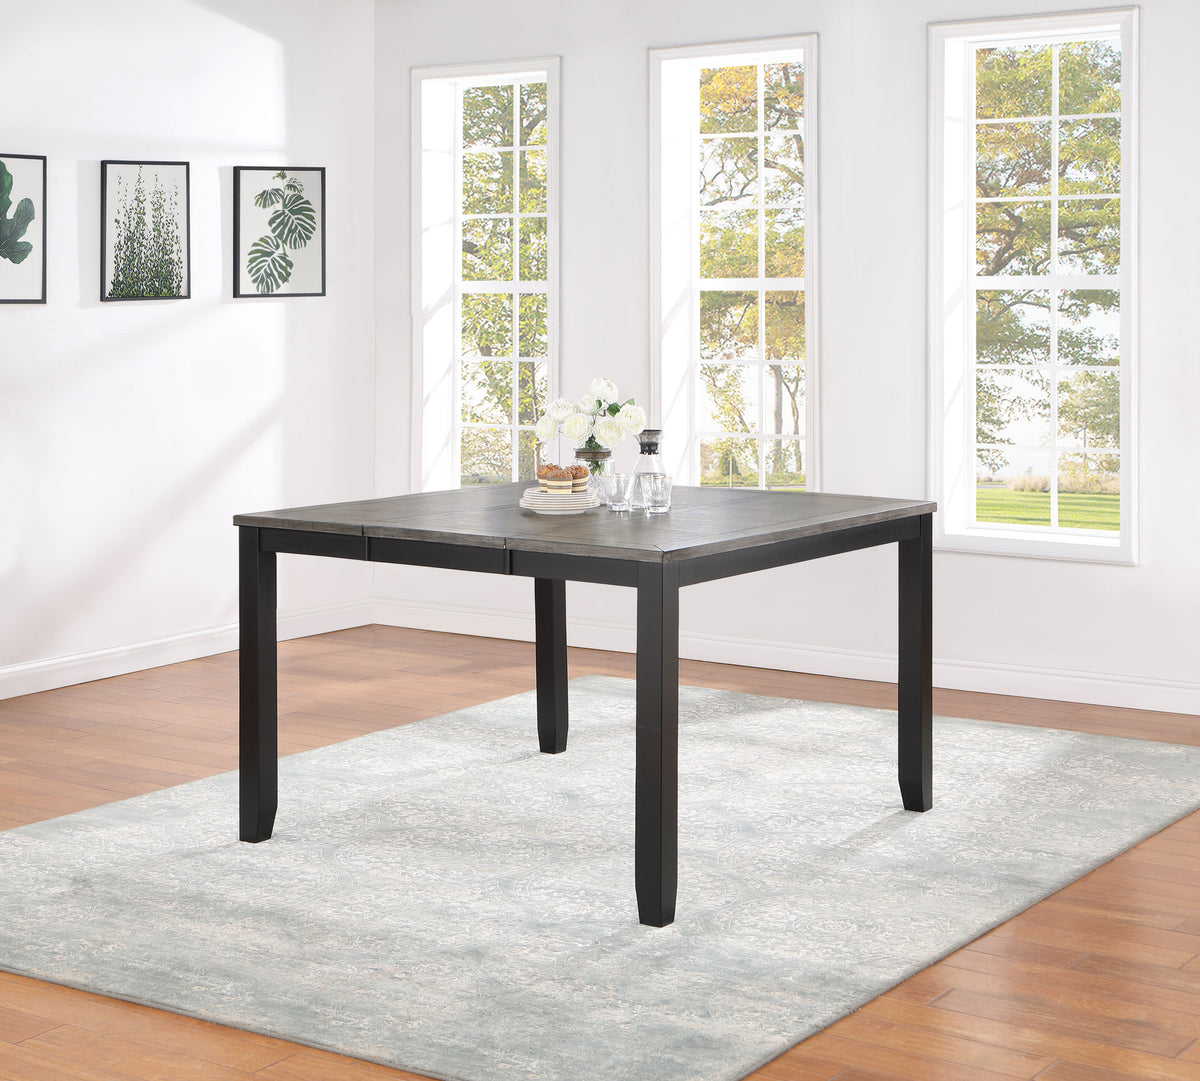 Elodie Counter Height Dining Table with Extension Leaf Grey and Black  Las Vegas Furniture Stores